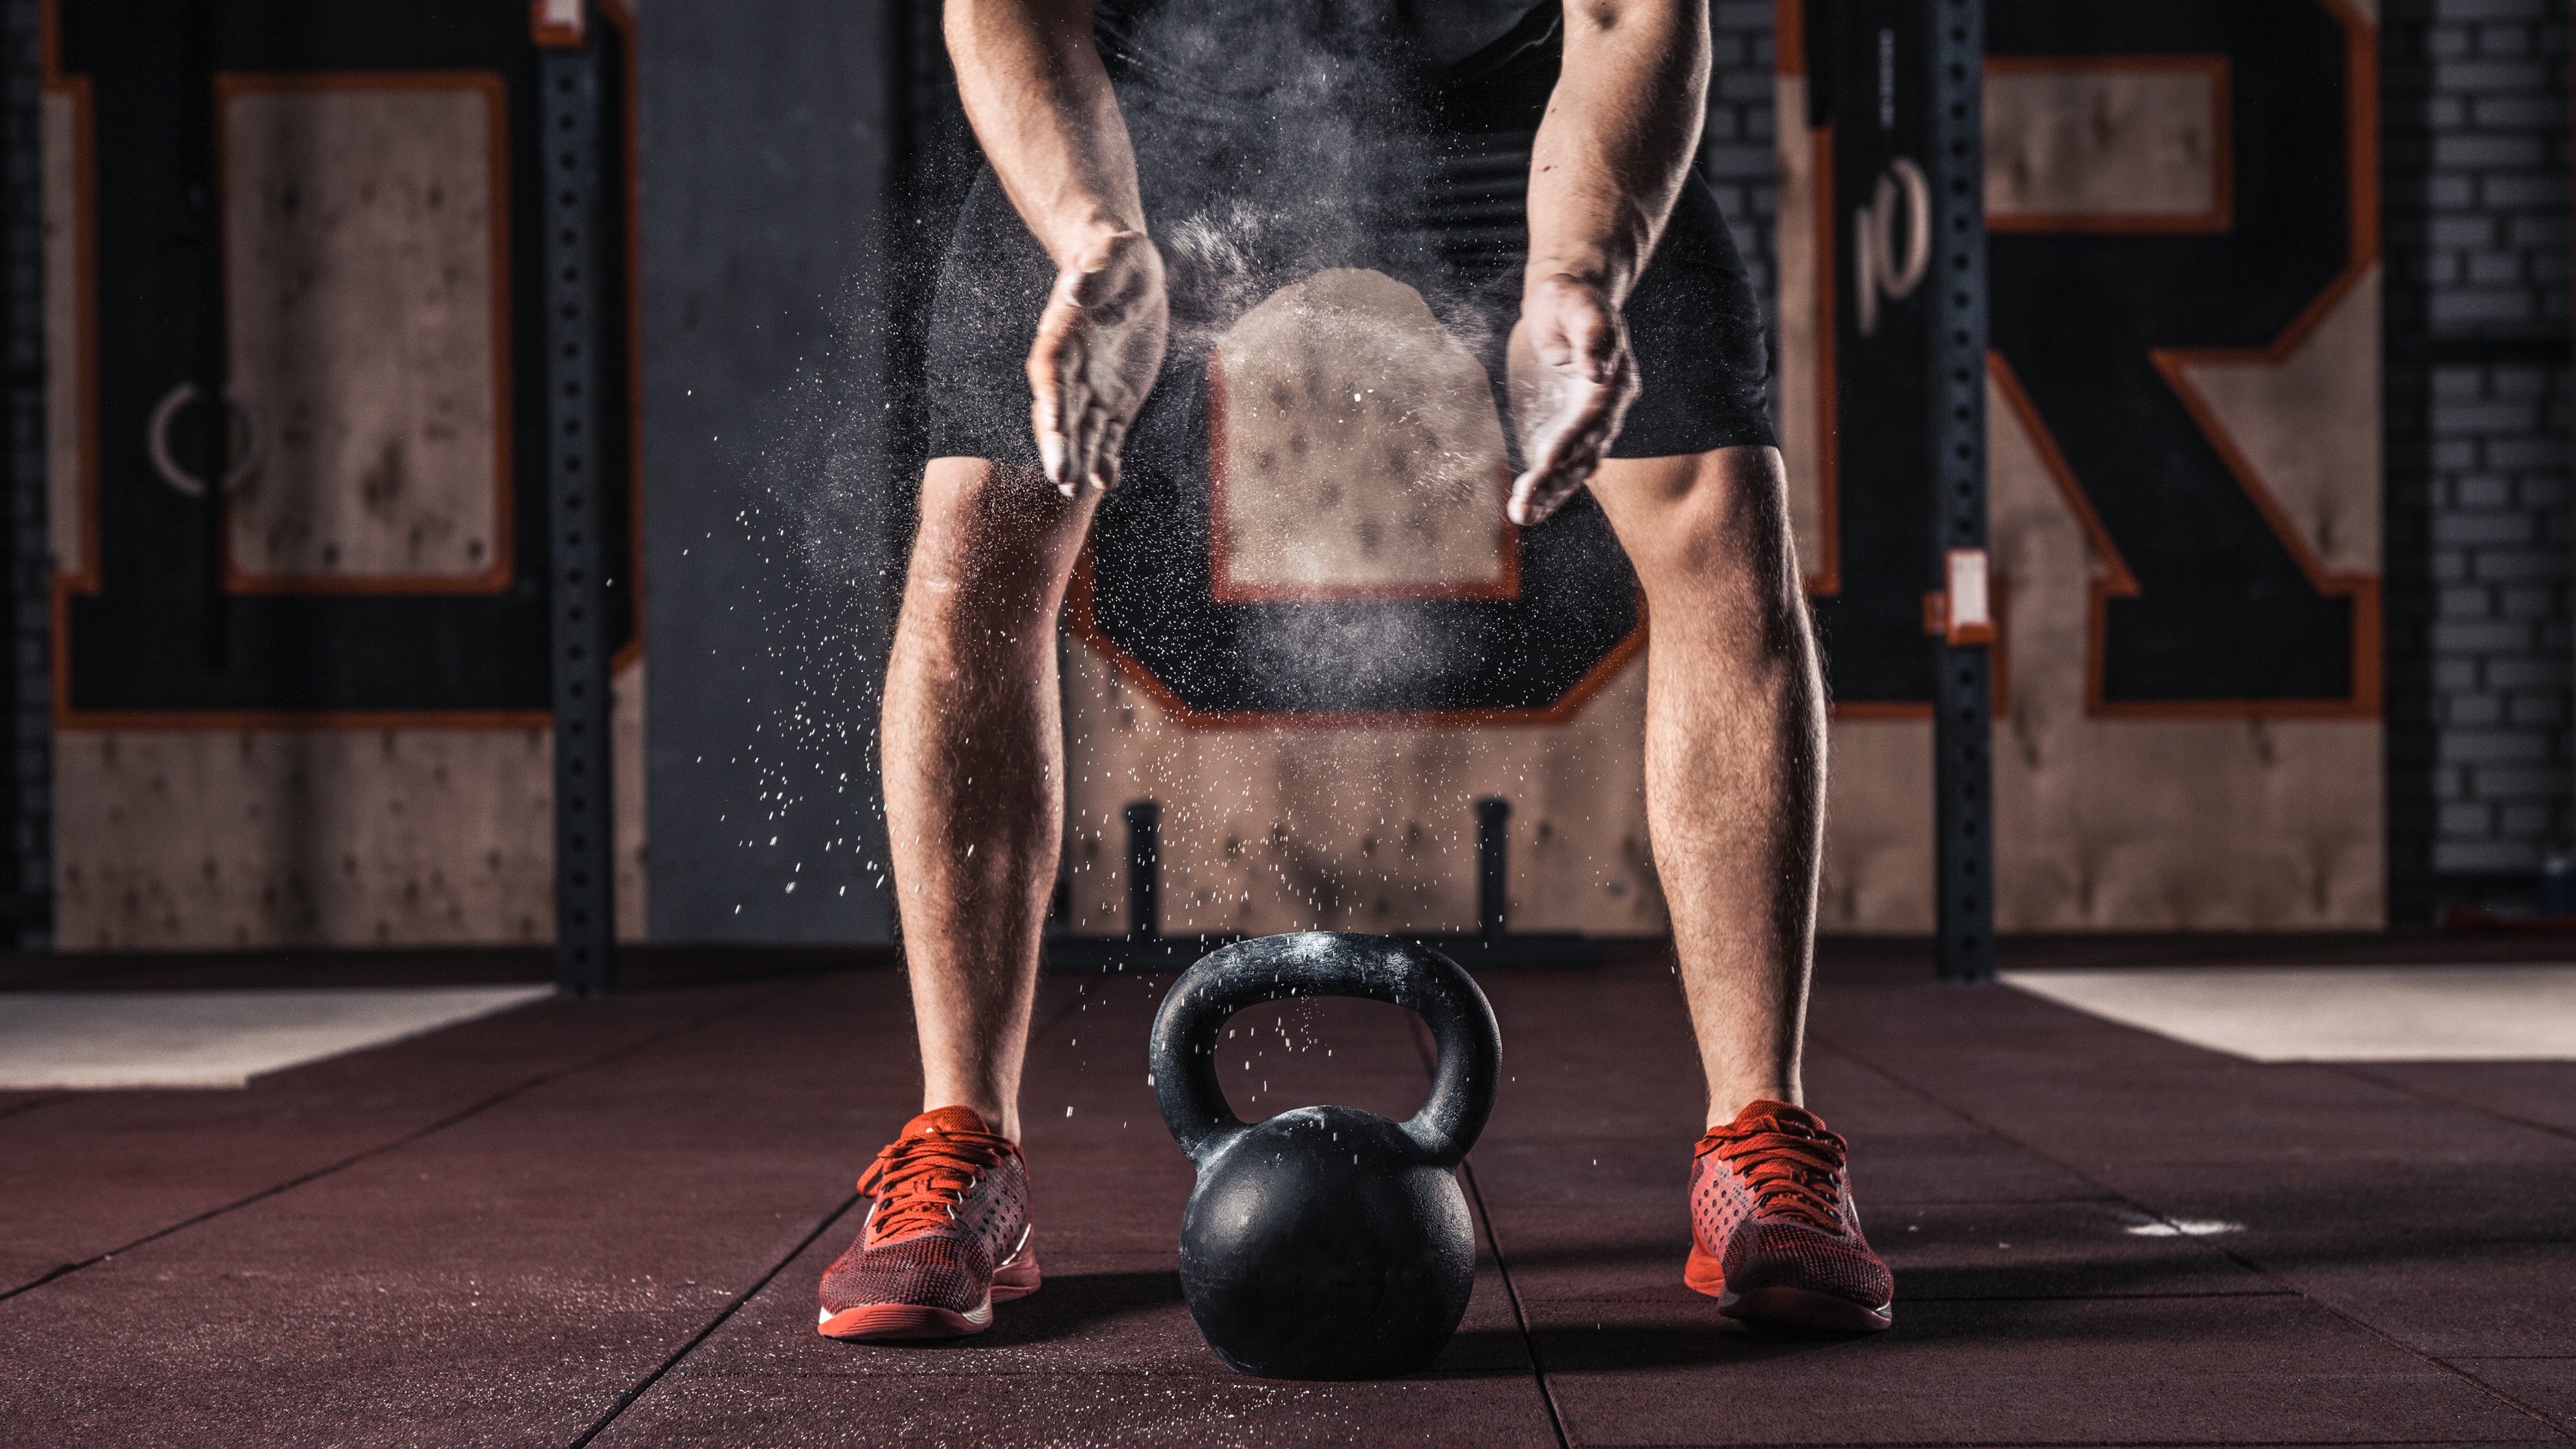 Kettlebell Swings Explained: This Is What You Need to Know